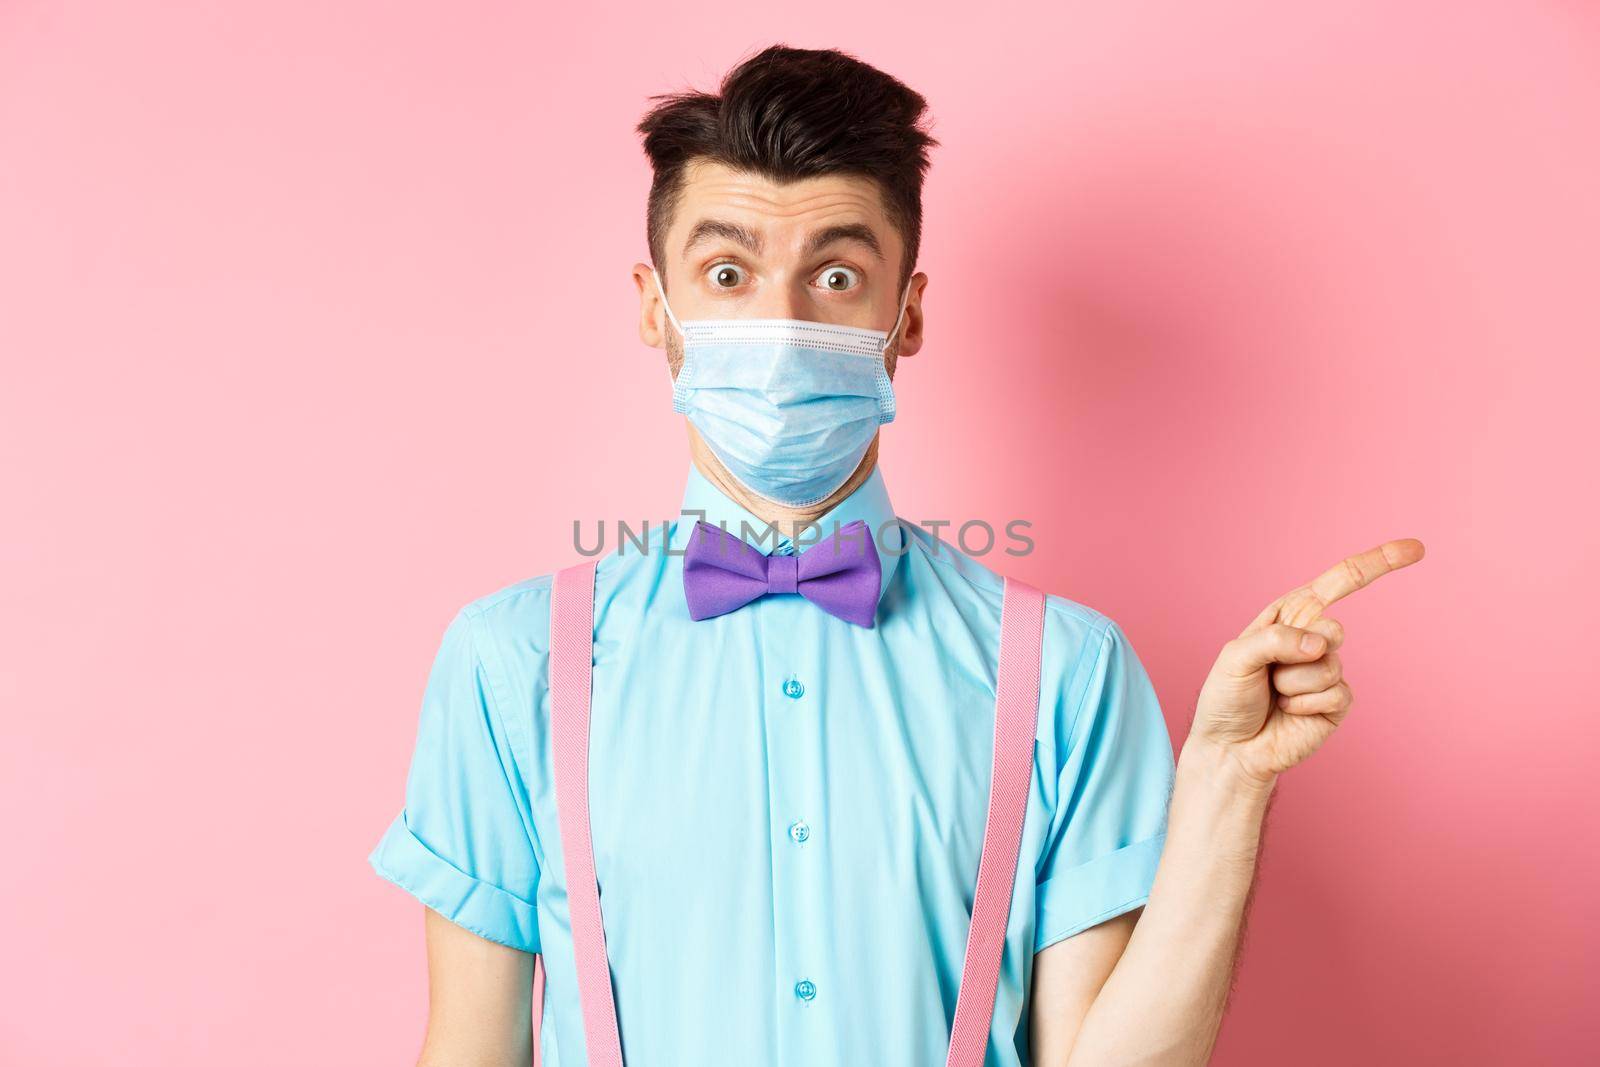 Coronavirus, healthcare and quarantine concept. Man looking surprised in medical mask, asking question and pointing right, curious about promo offer, standing on pink background.